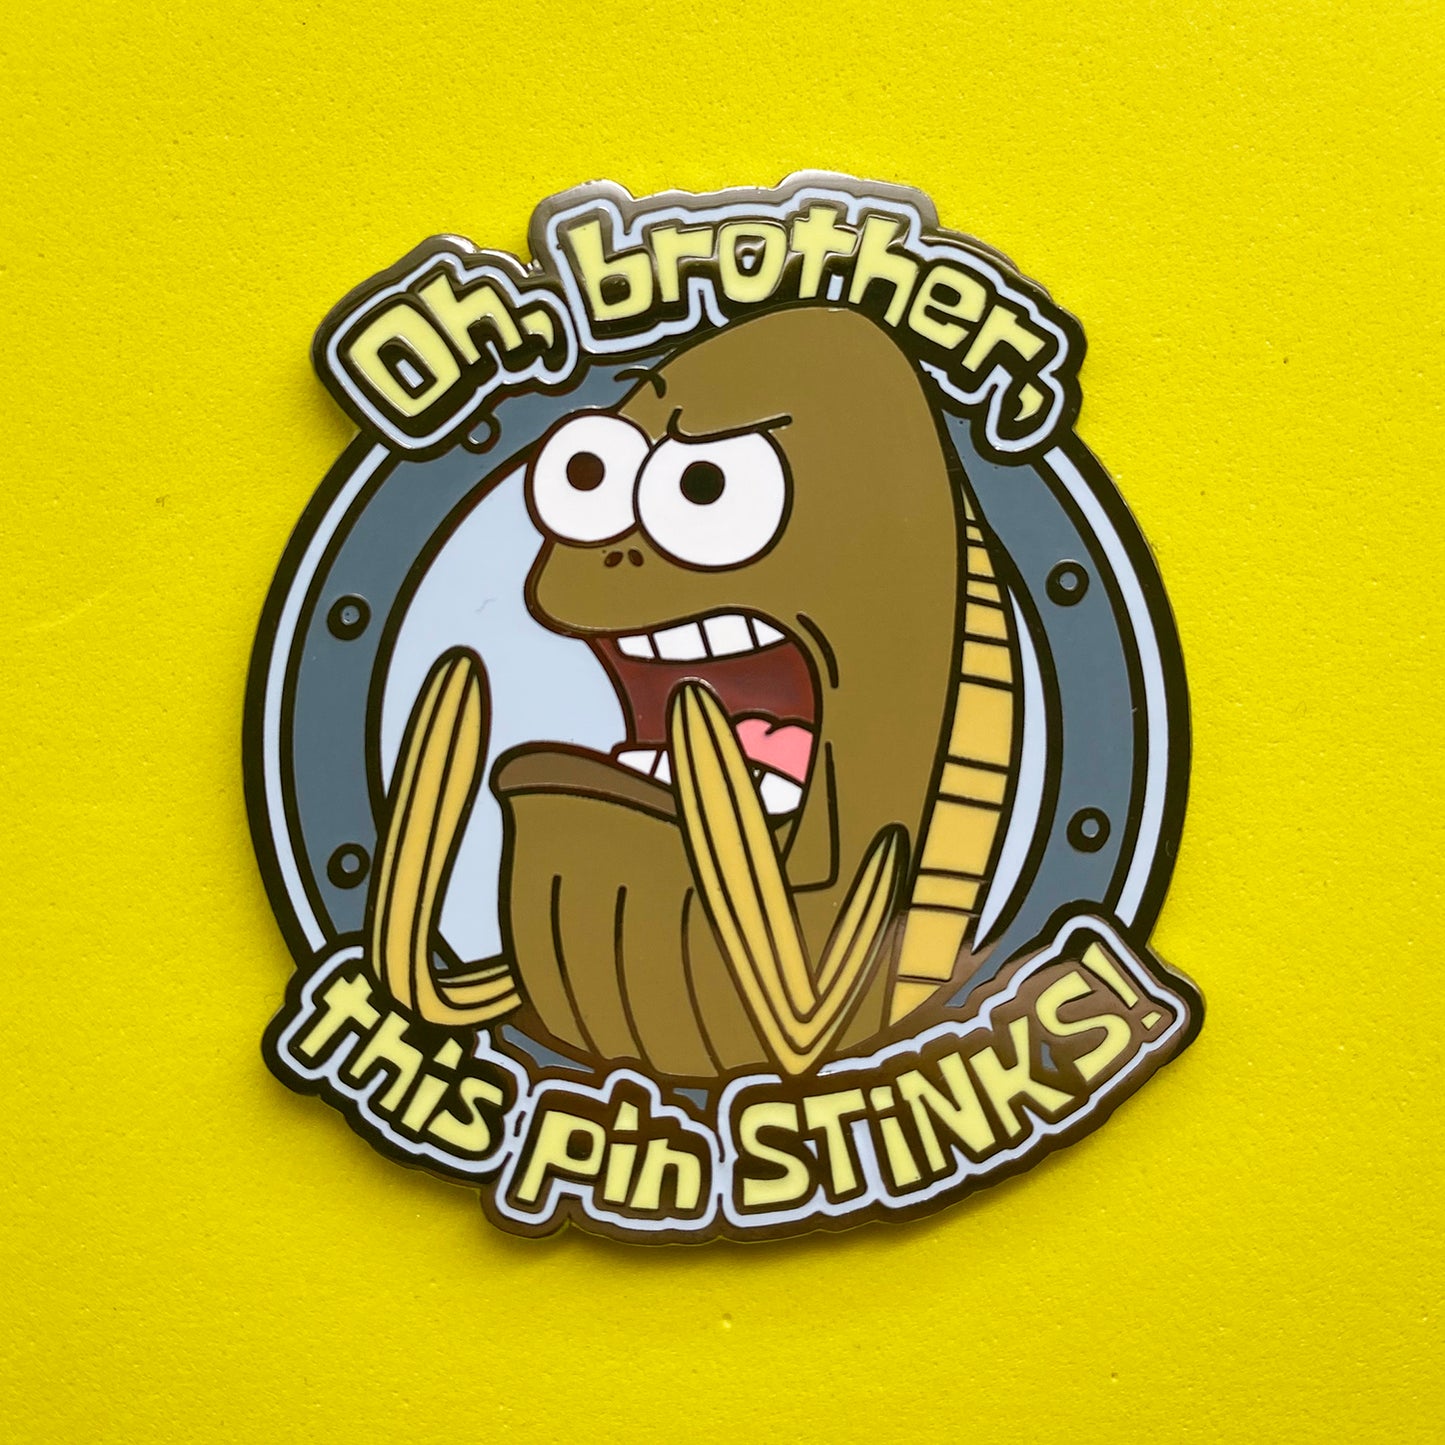 Oh Brother, This Pin STINKS! 1.75" hard enamel pin